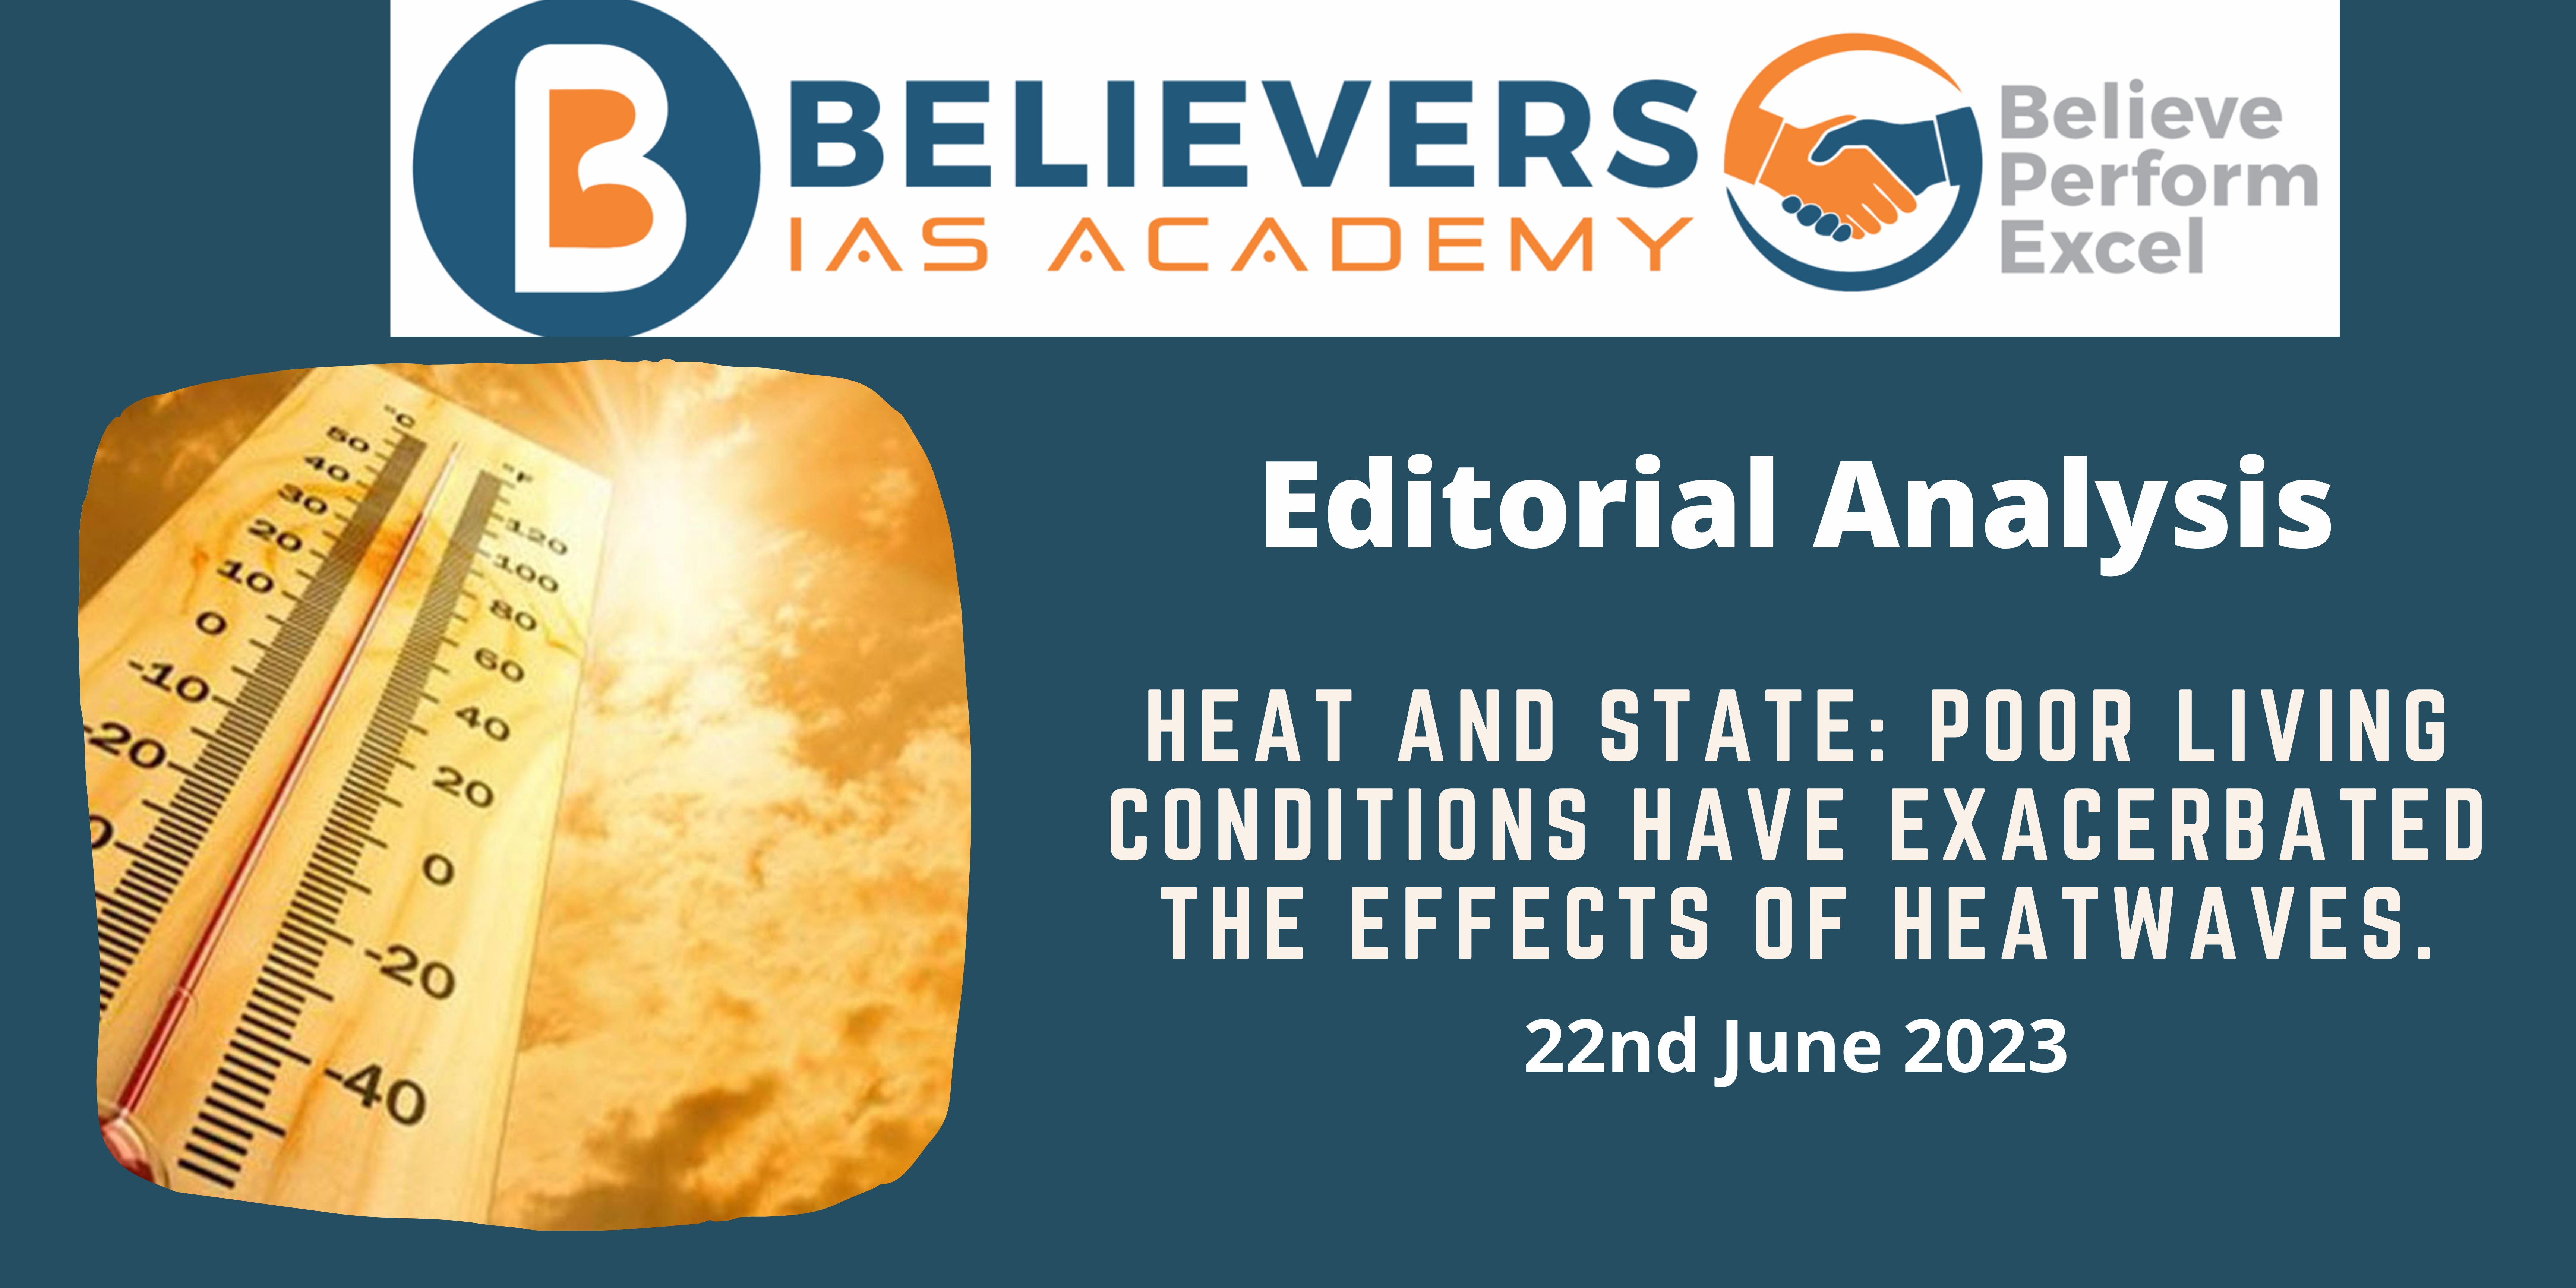 Heat and State: Poor living conditions have exacerbated the effects of heatwaves.